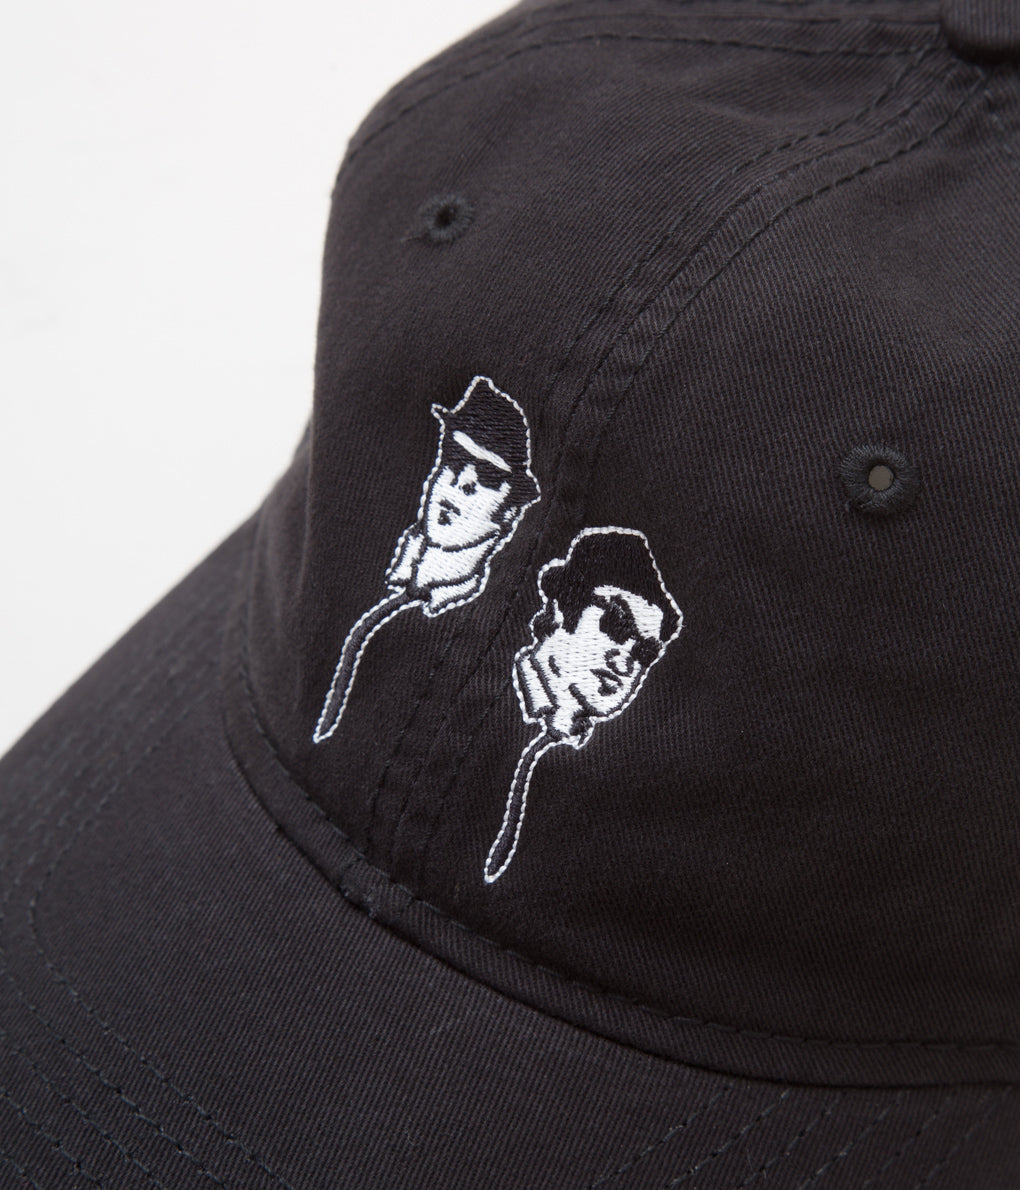 BLUESCENTRIC "BLUES BROTHERS SILHOUETTE CAP"(BLACK)